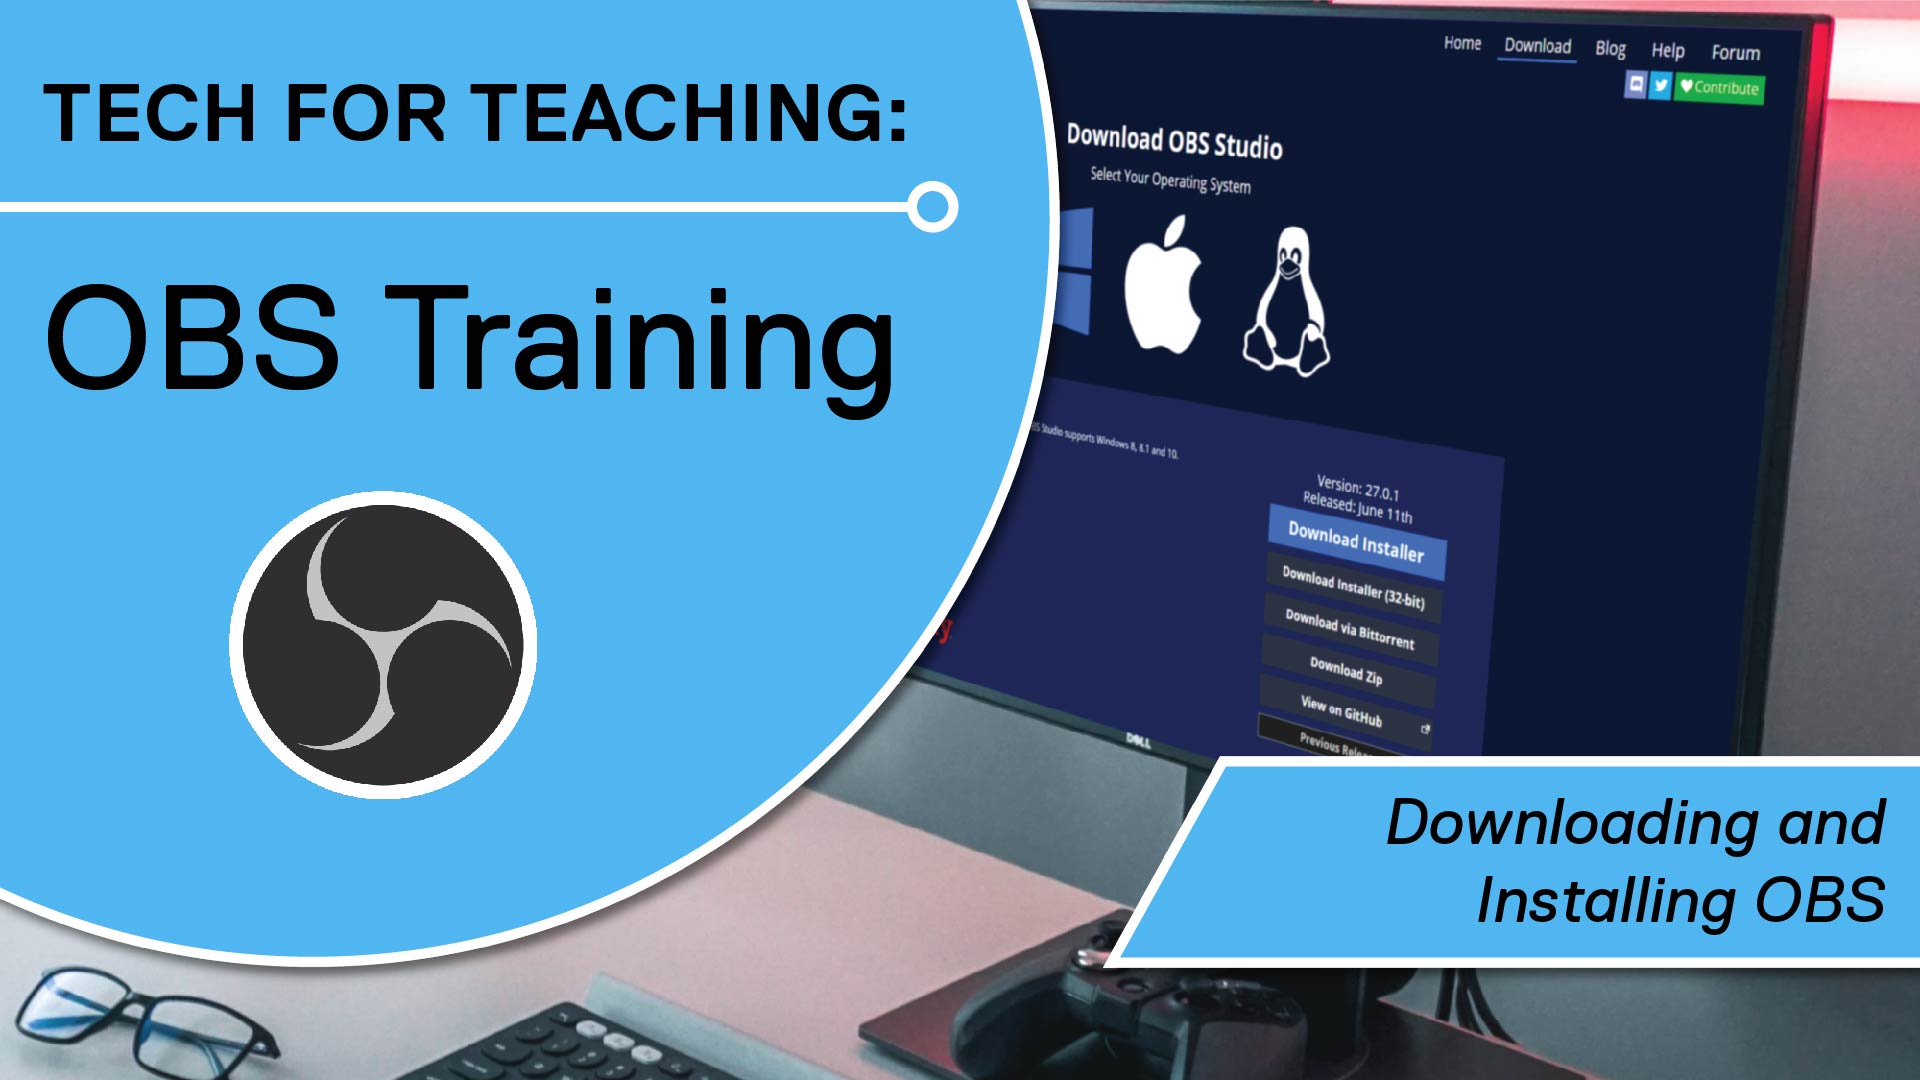 Tech for Teaching: OBS Training - Downloading and Installing OBS 